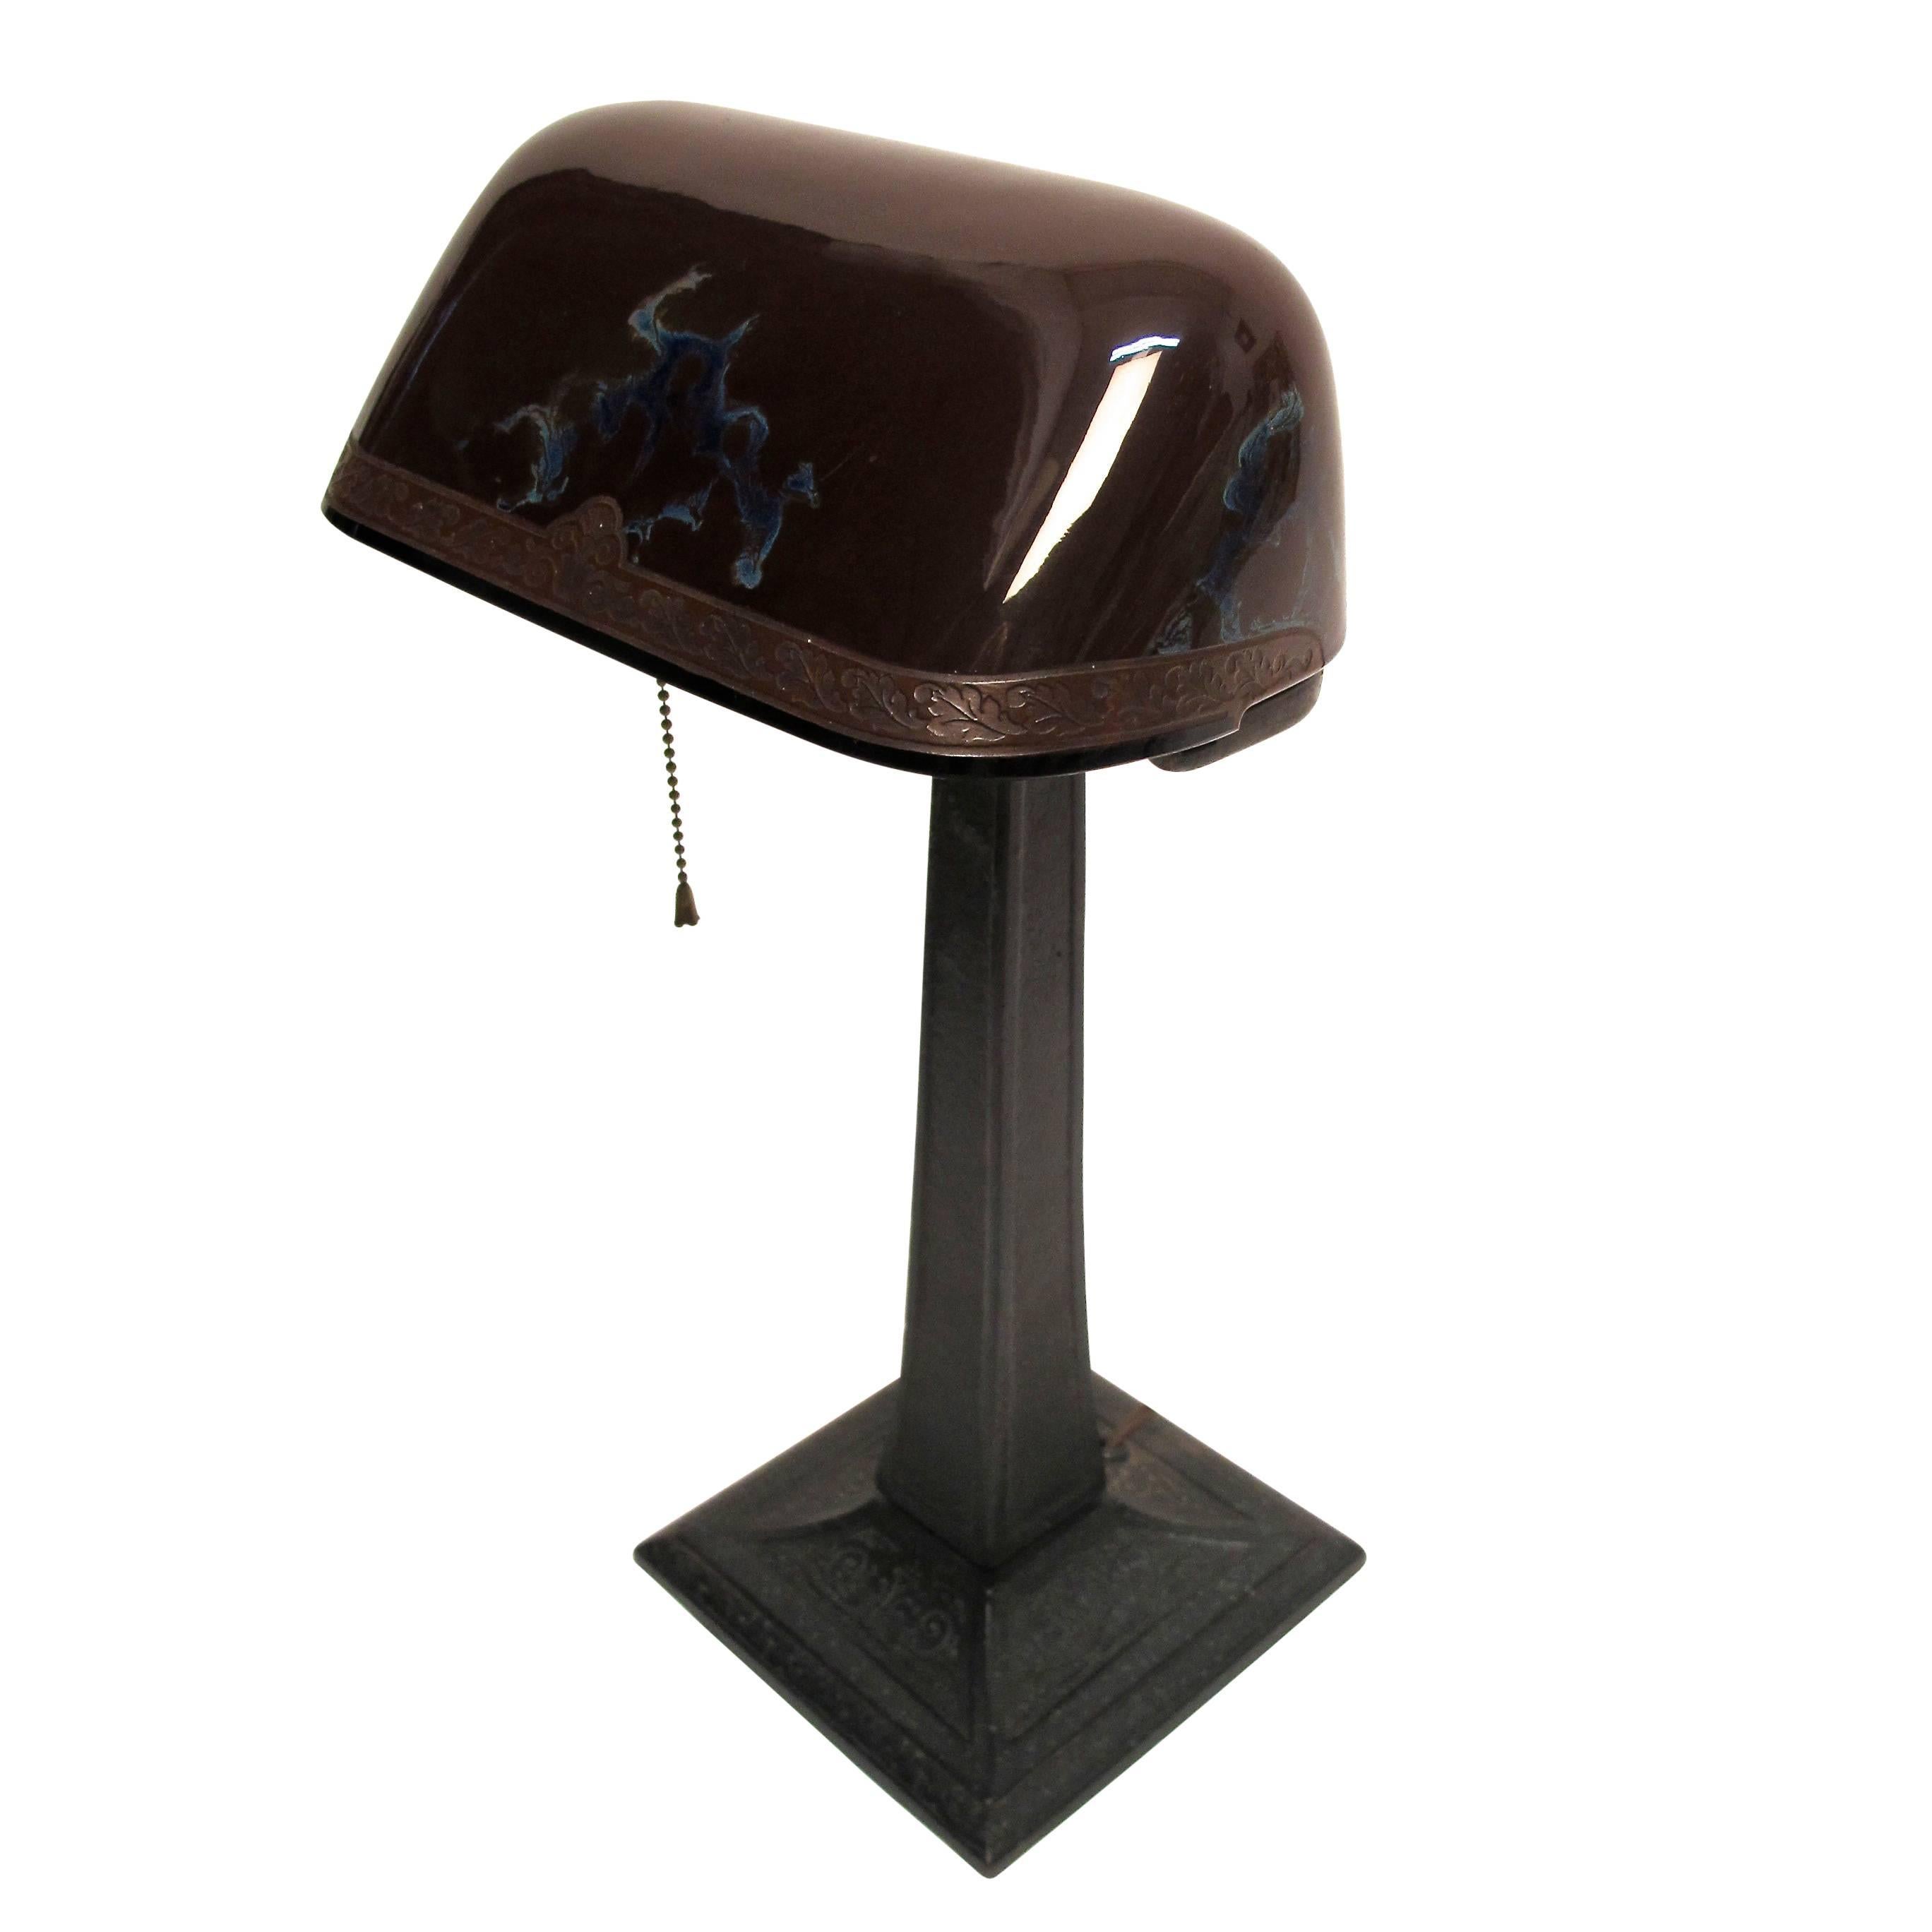 Emeralite desk lamp with unusual cased art glass shade and metal base, American, early 20th century.